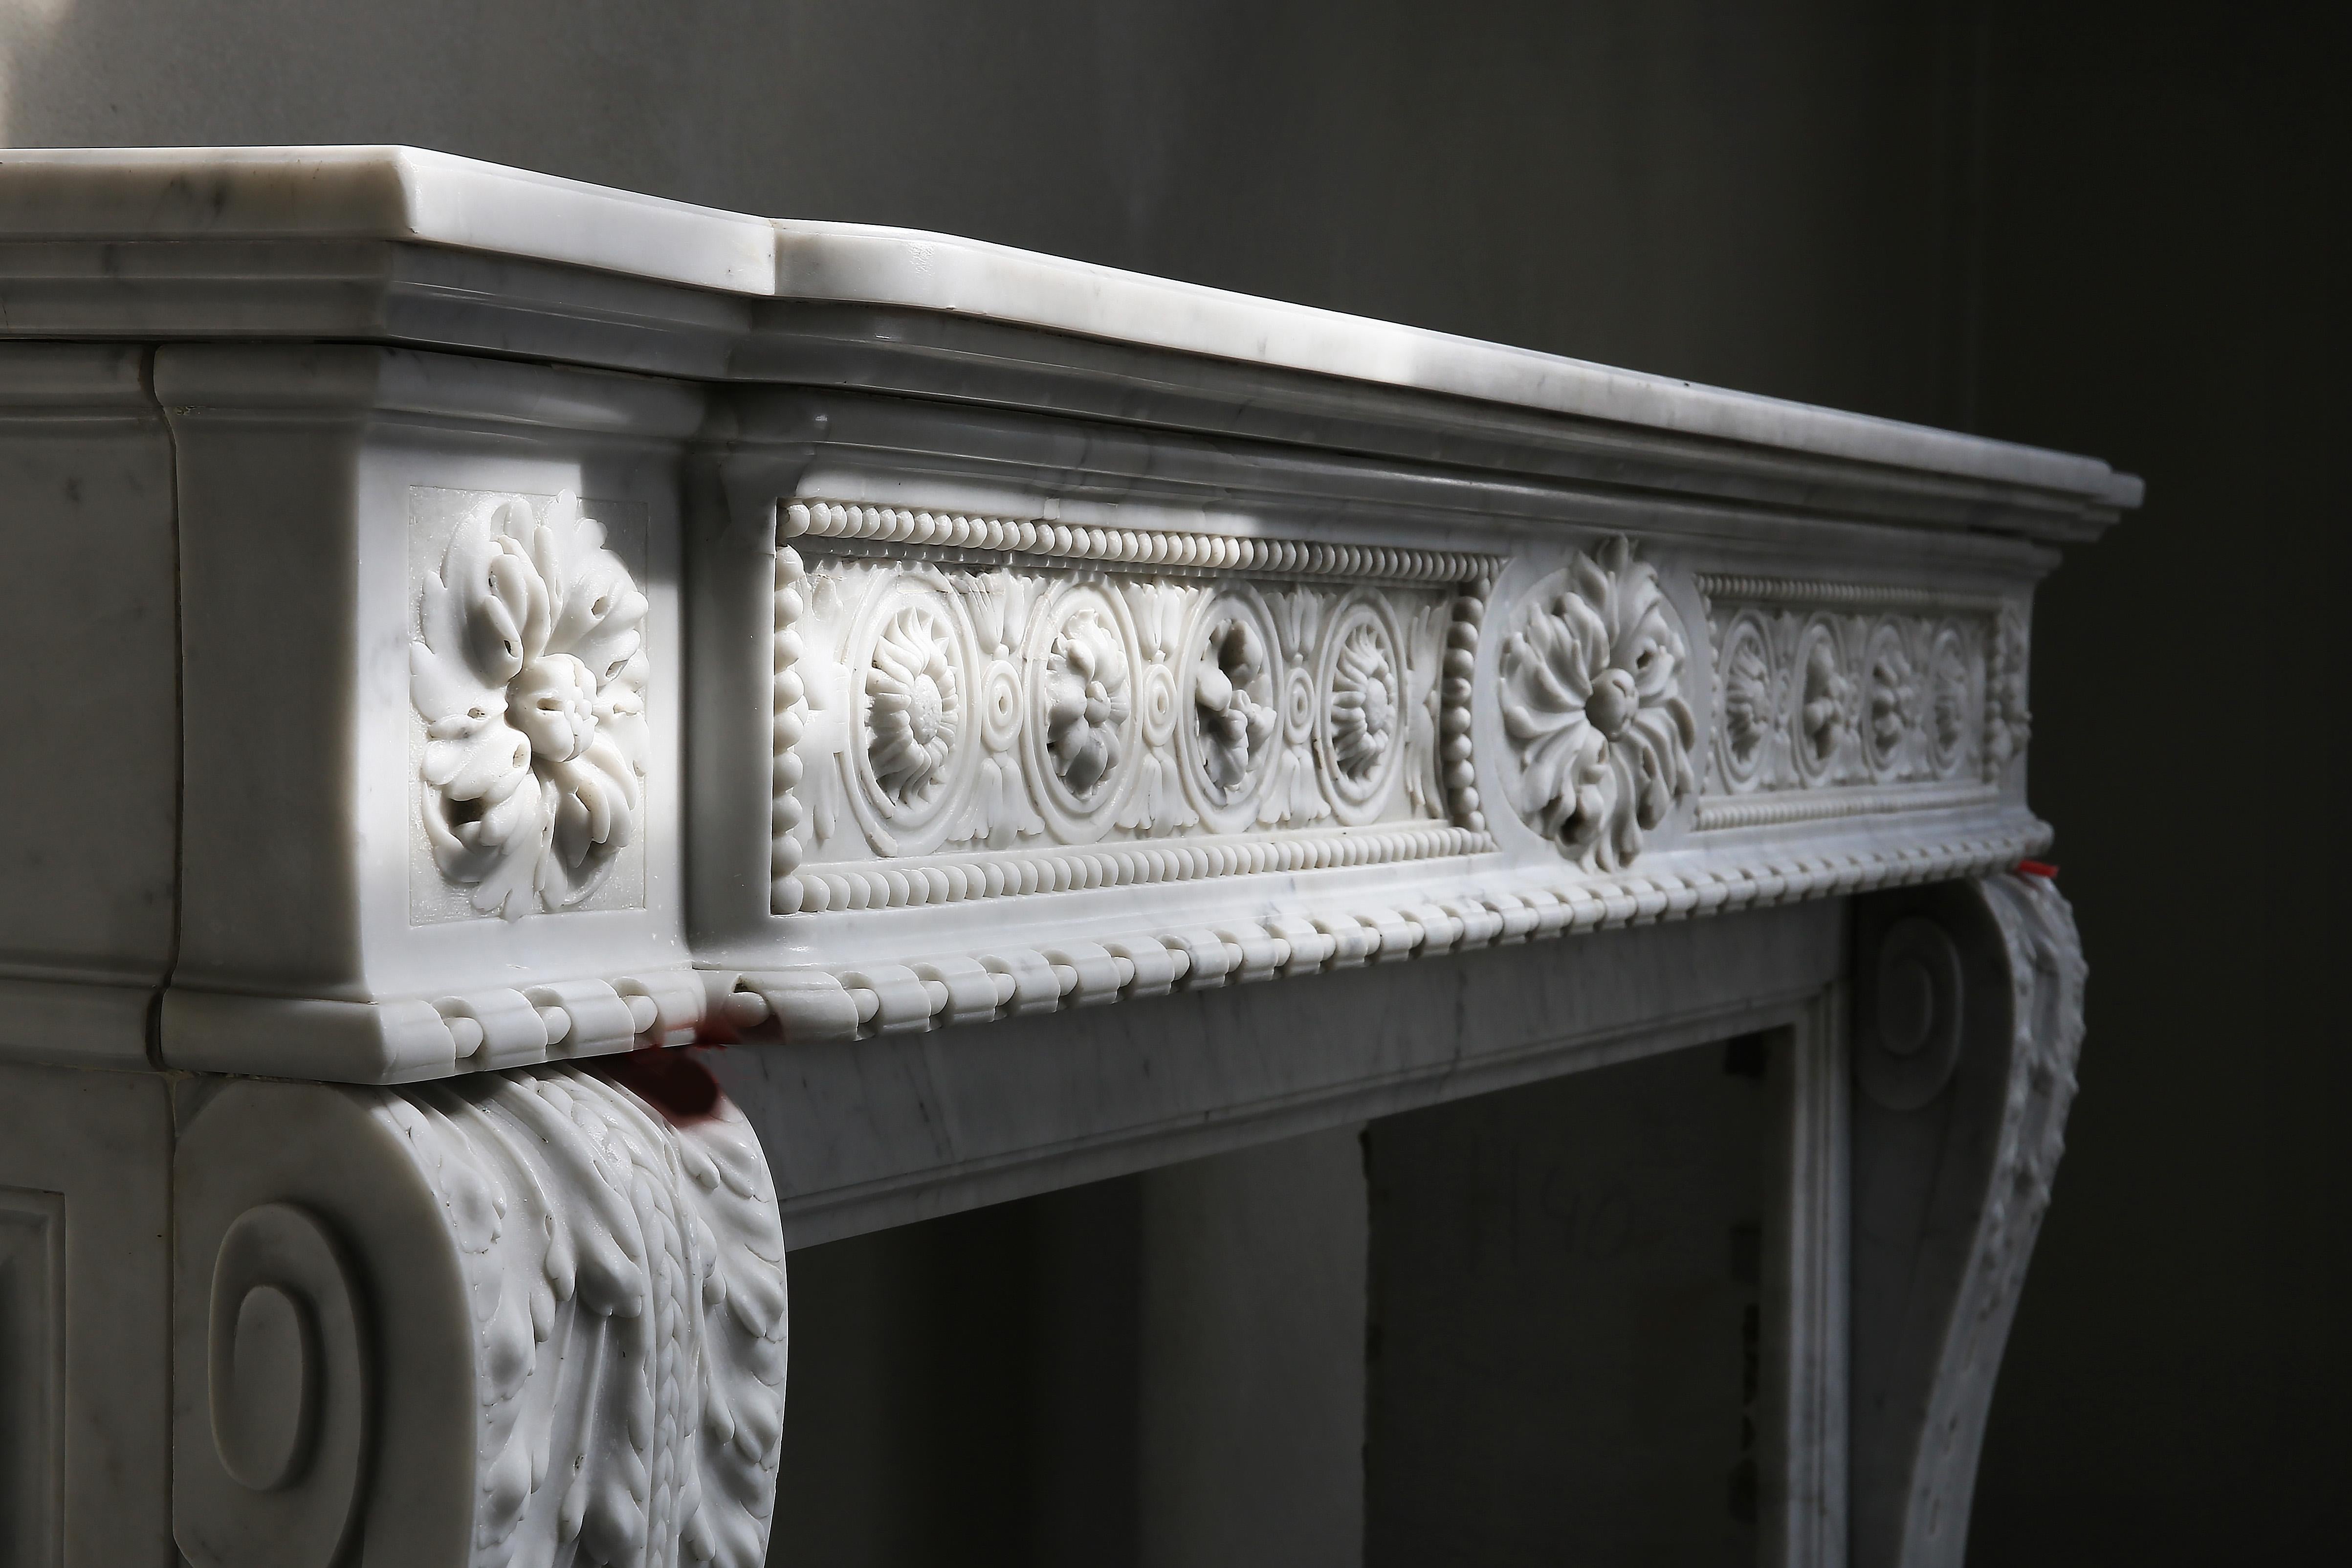 Special and exclusive antique fireplace made of Carrara marble! This fireplace in the style of Louis XVI dates from the 18th century. The top is richly decorated with various elegant ornaments. The legs are provided with acanthus leaves and are